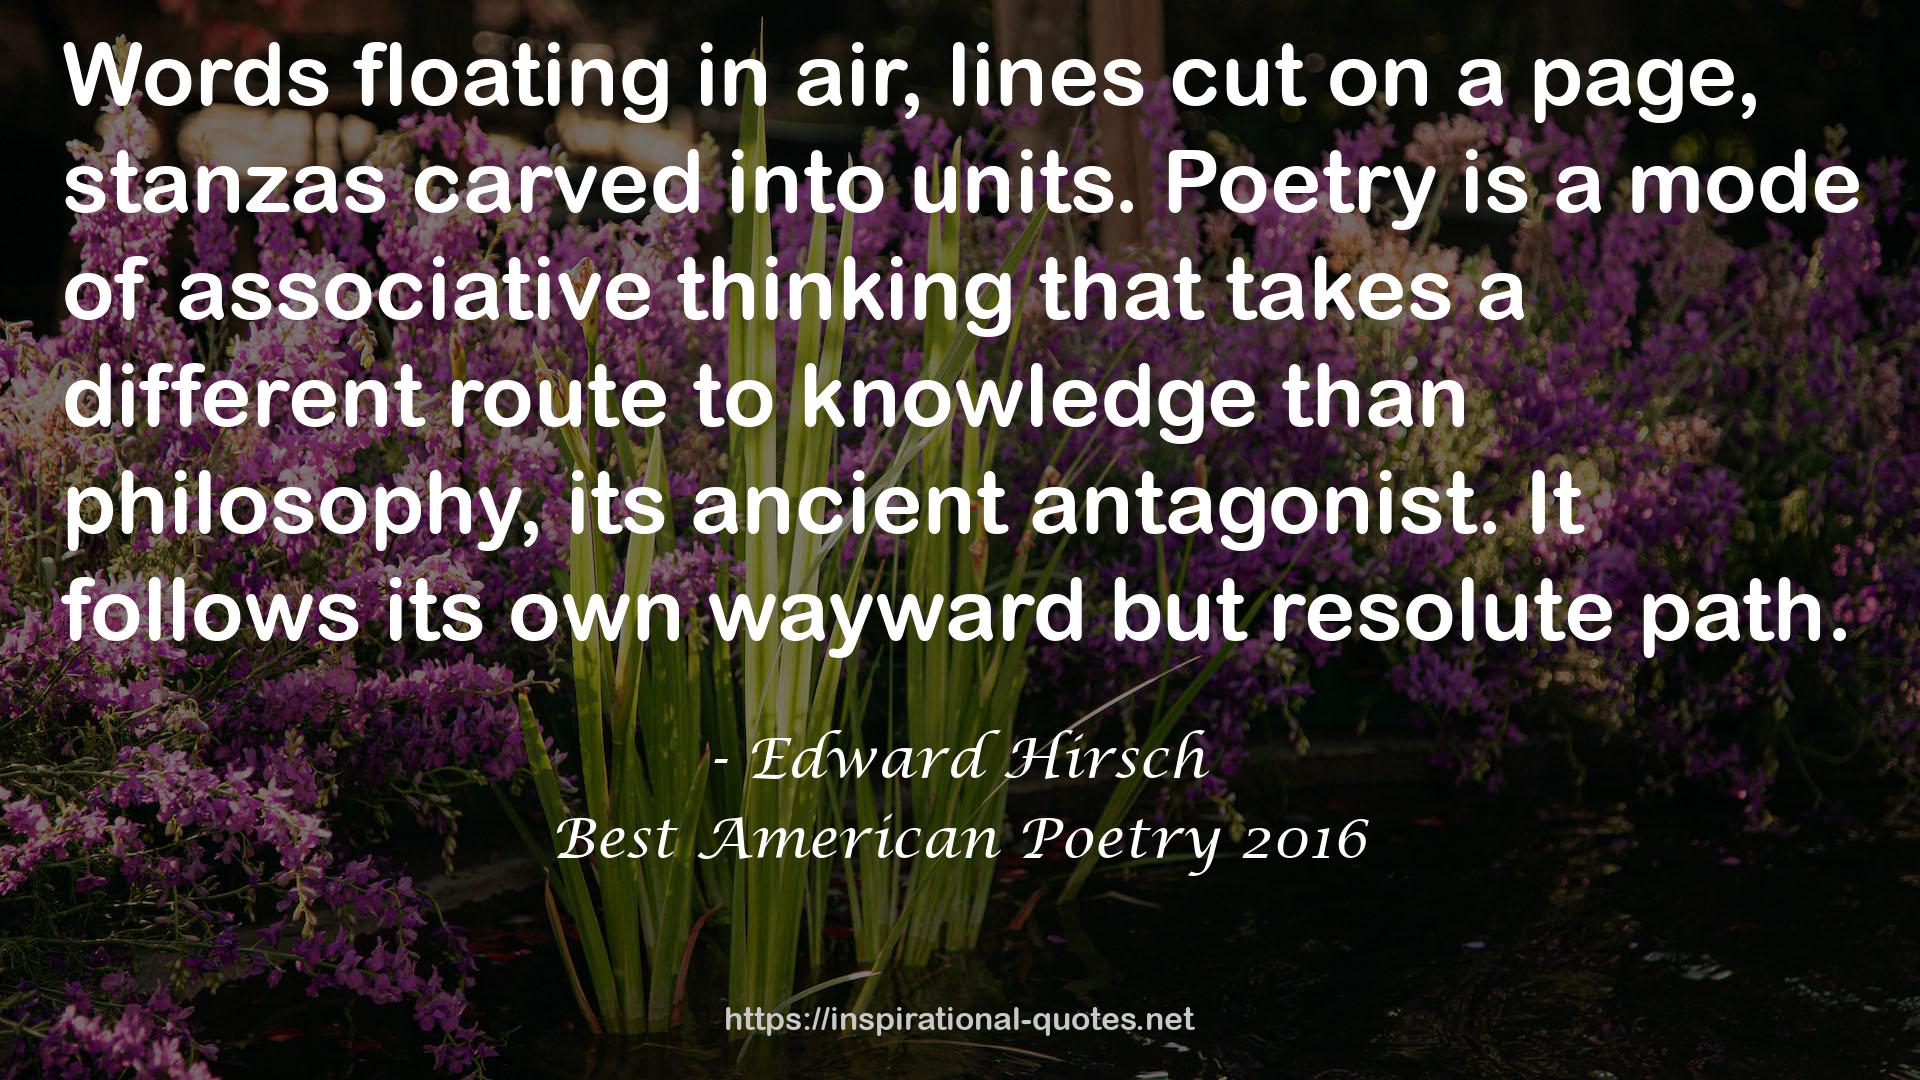 Best American Poetry 2016 QUOTES